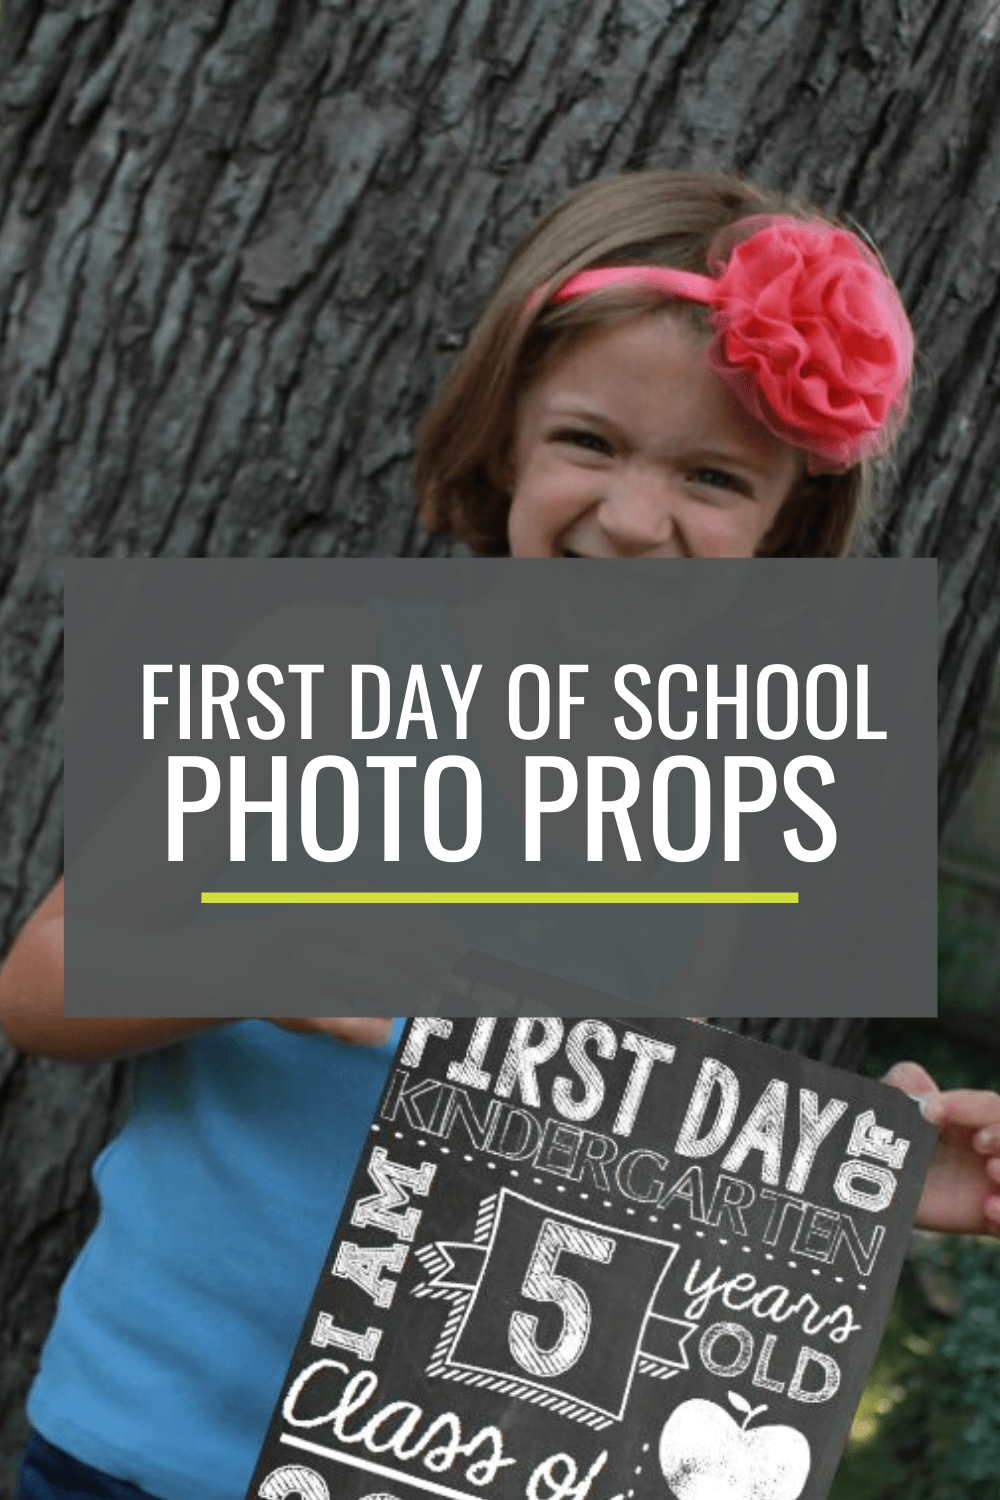 First Day of School Photo Props